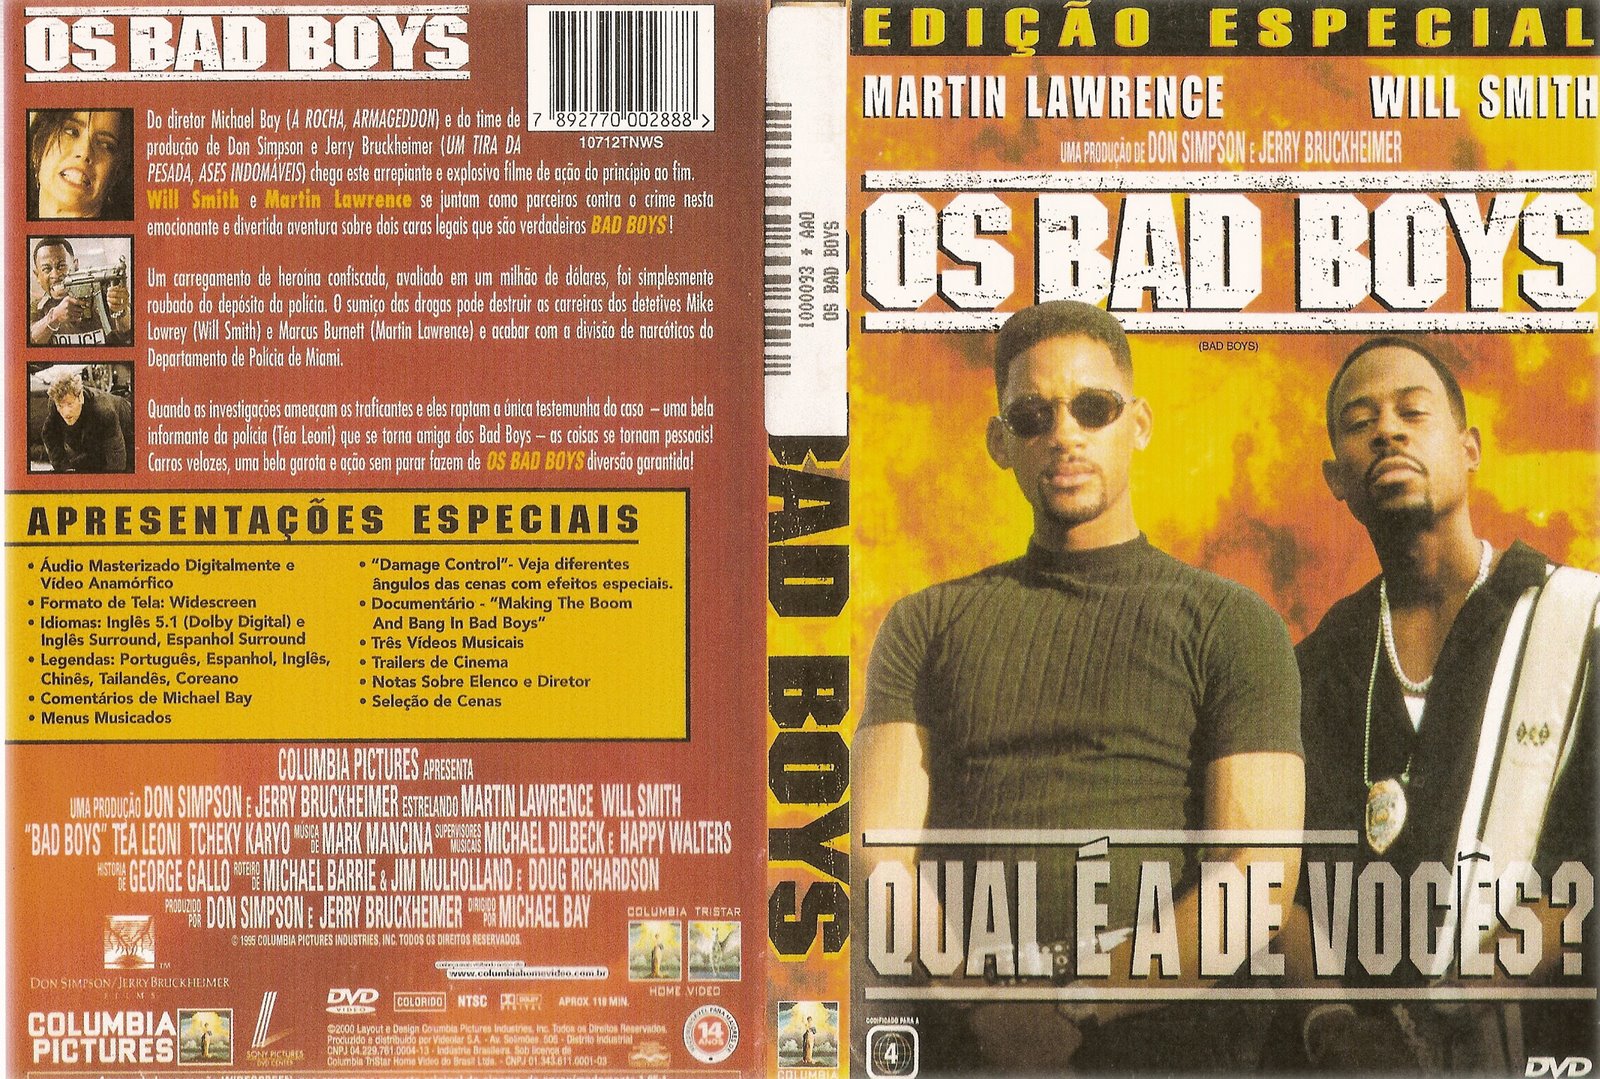 Pharao - Bad boys from the East. The Lost boys DVD Cover.